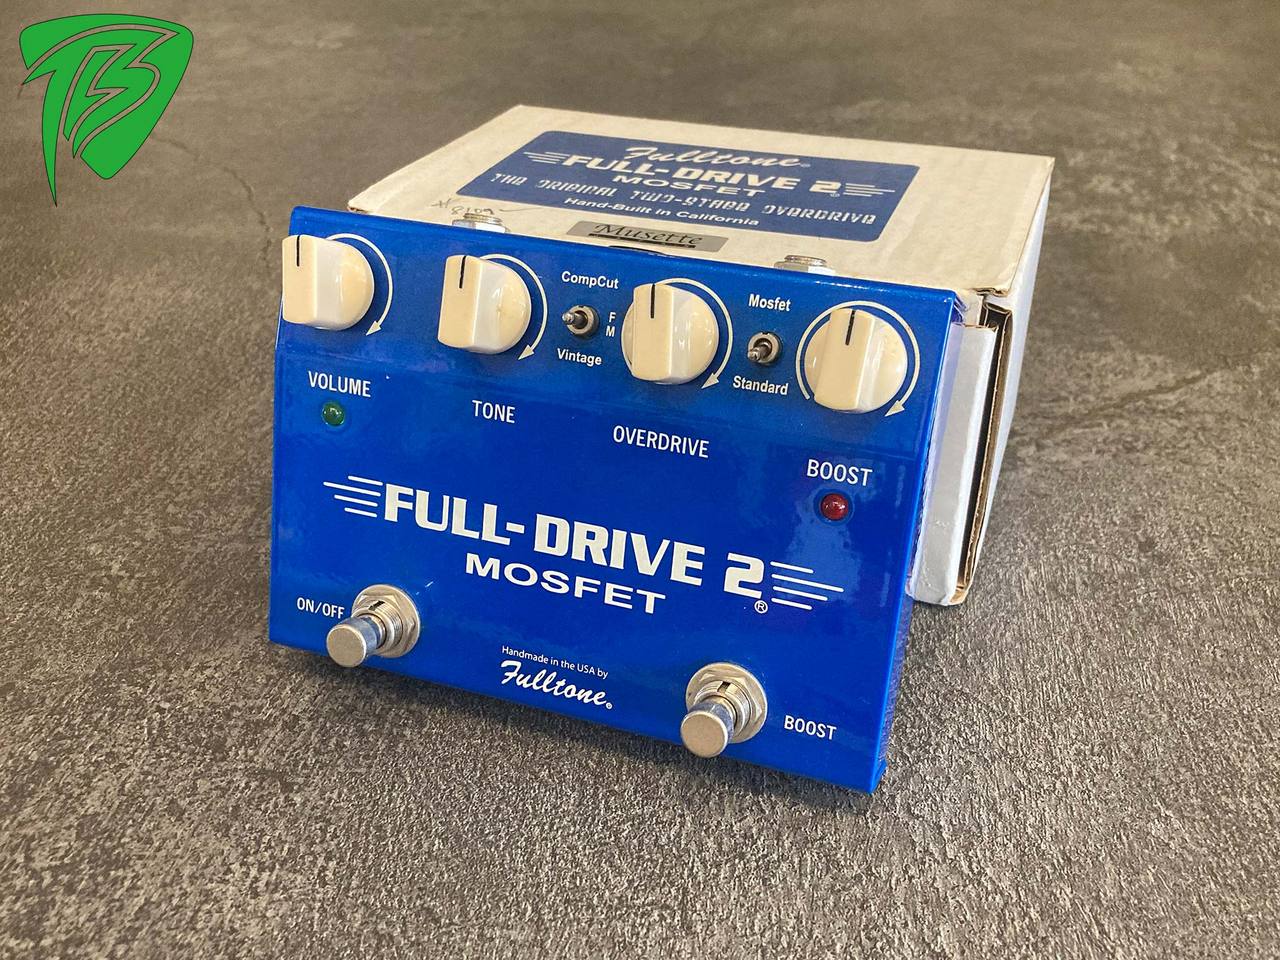 FULL DRIVE2 MOSFET